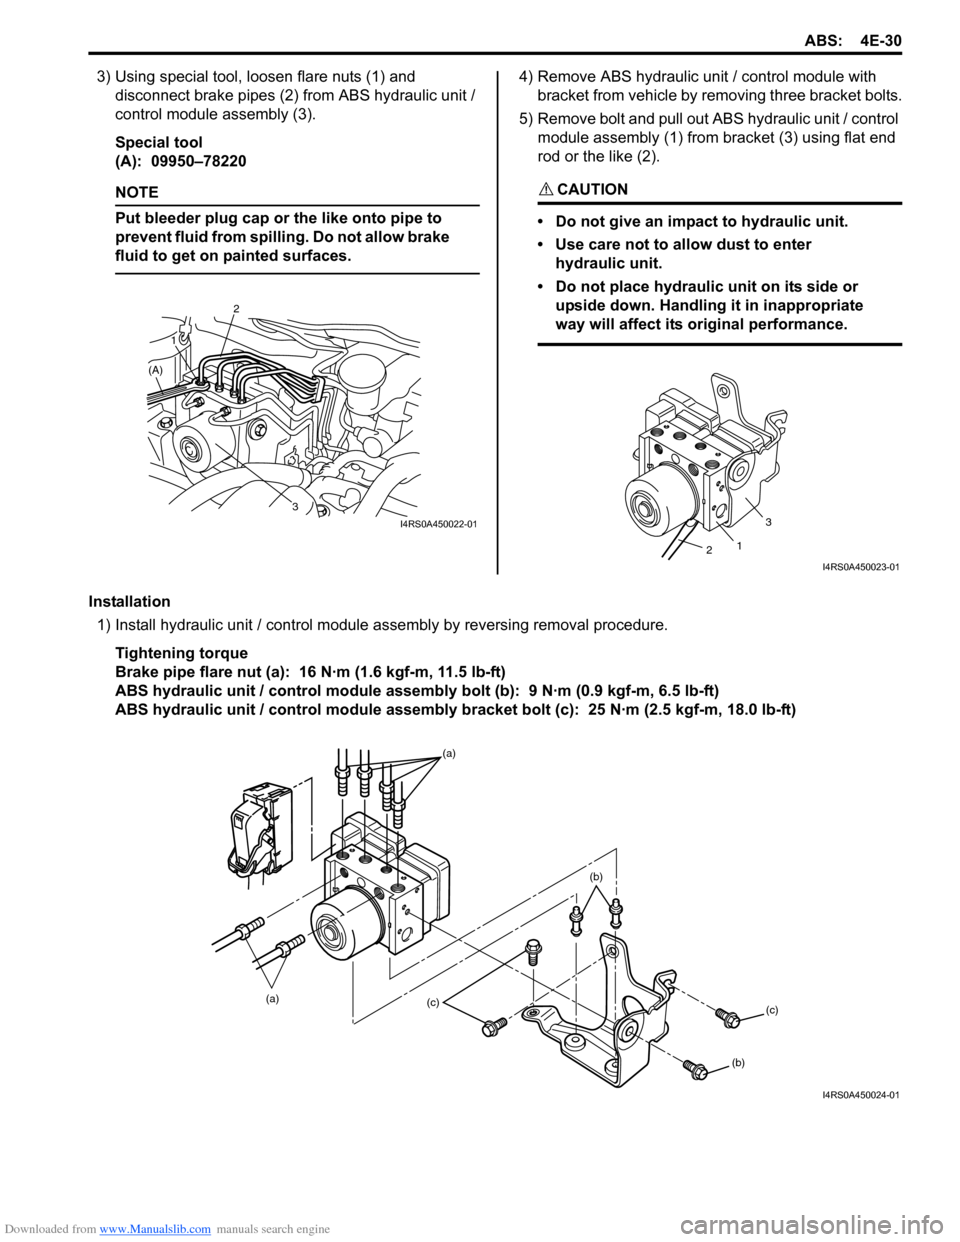 SUZUKI SWIFT 2008 2.G Service Workshop Manual Downloaded from www.Manualslib.com manuals search engine ABS: 4E-30
3) Using special tool, loosen flare nuts (1) and disconnect brake pipes (2) from ABS hydraulic unit / 
control module assembly (3).
